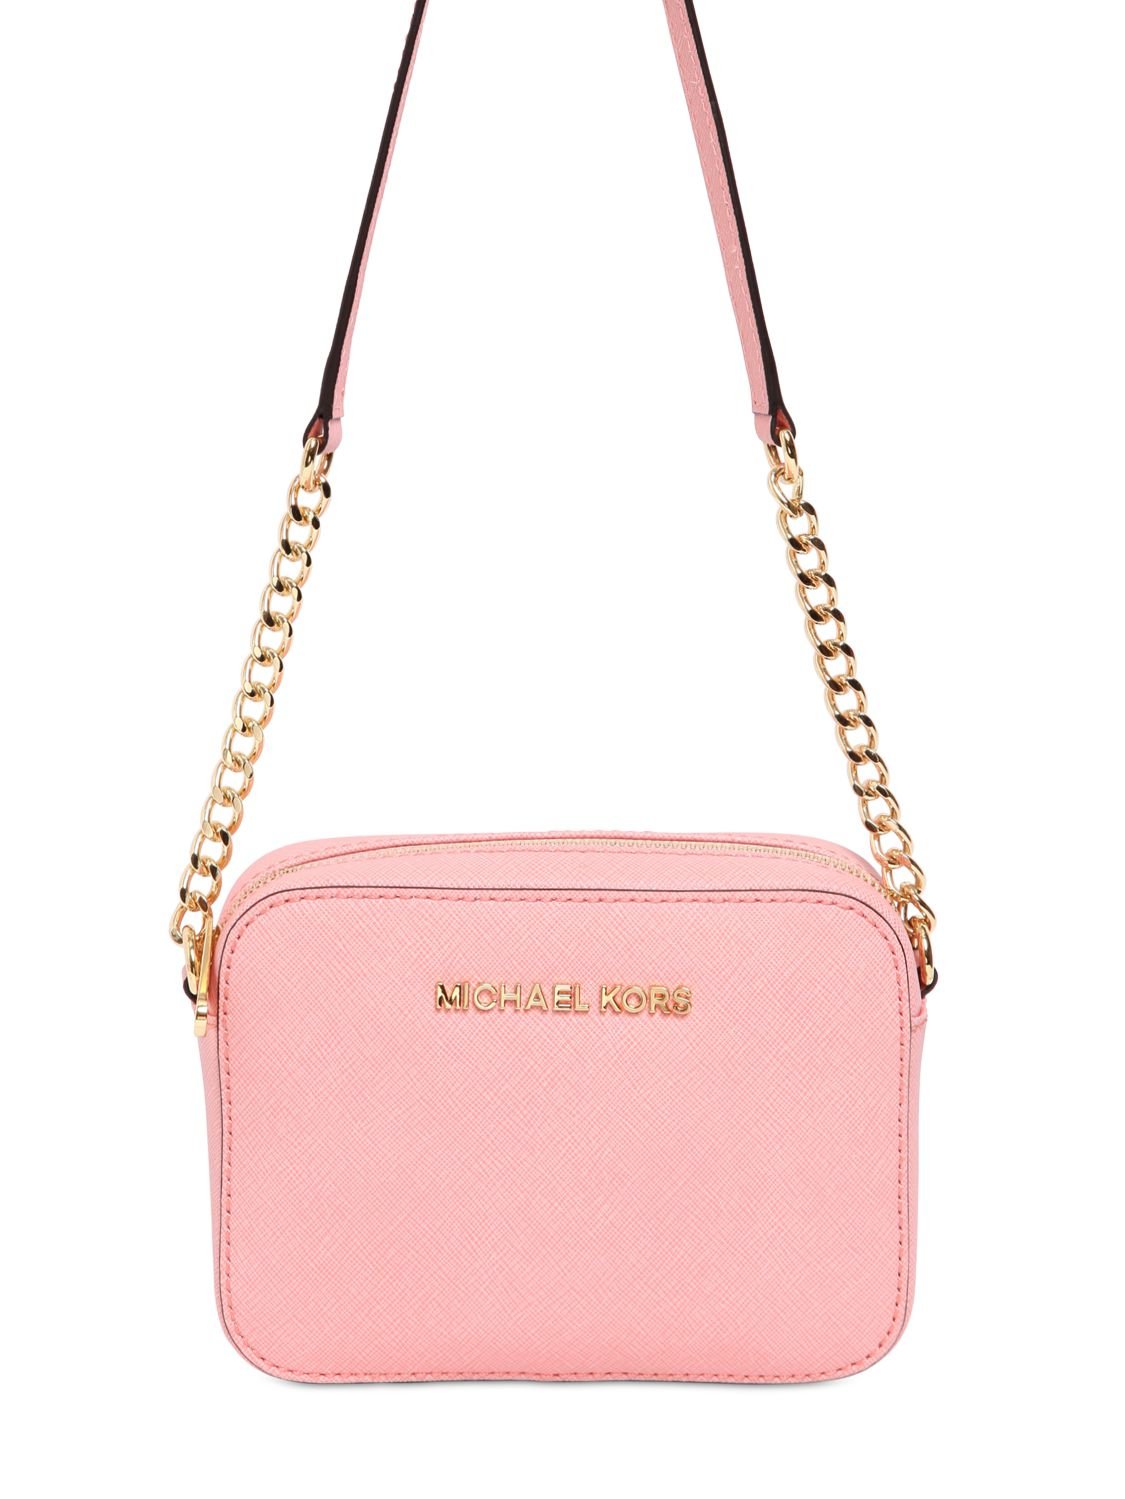 MICHAEL Michael Kors Jet Set Chain Saffiano Leather Bag in Light Pink (Pink) - Lyst